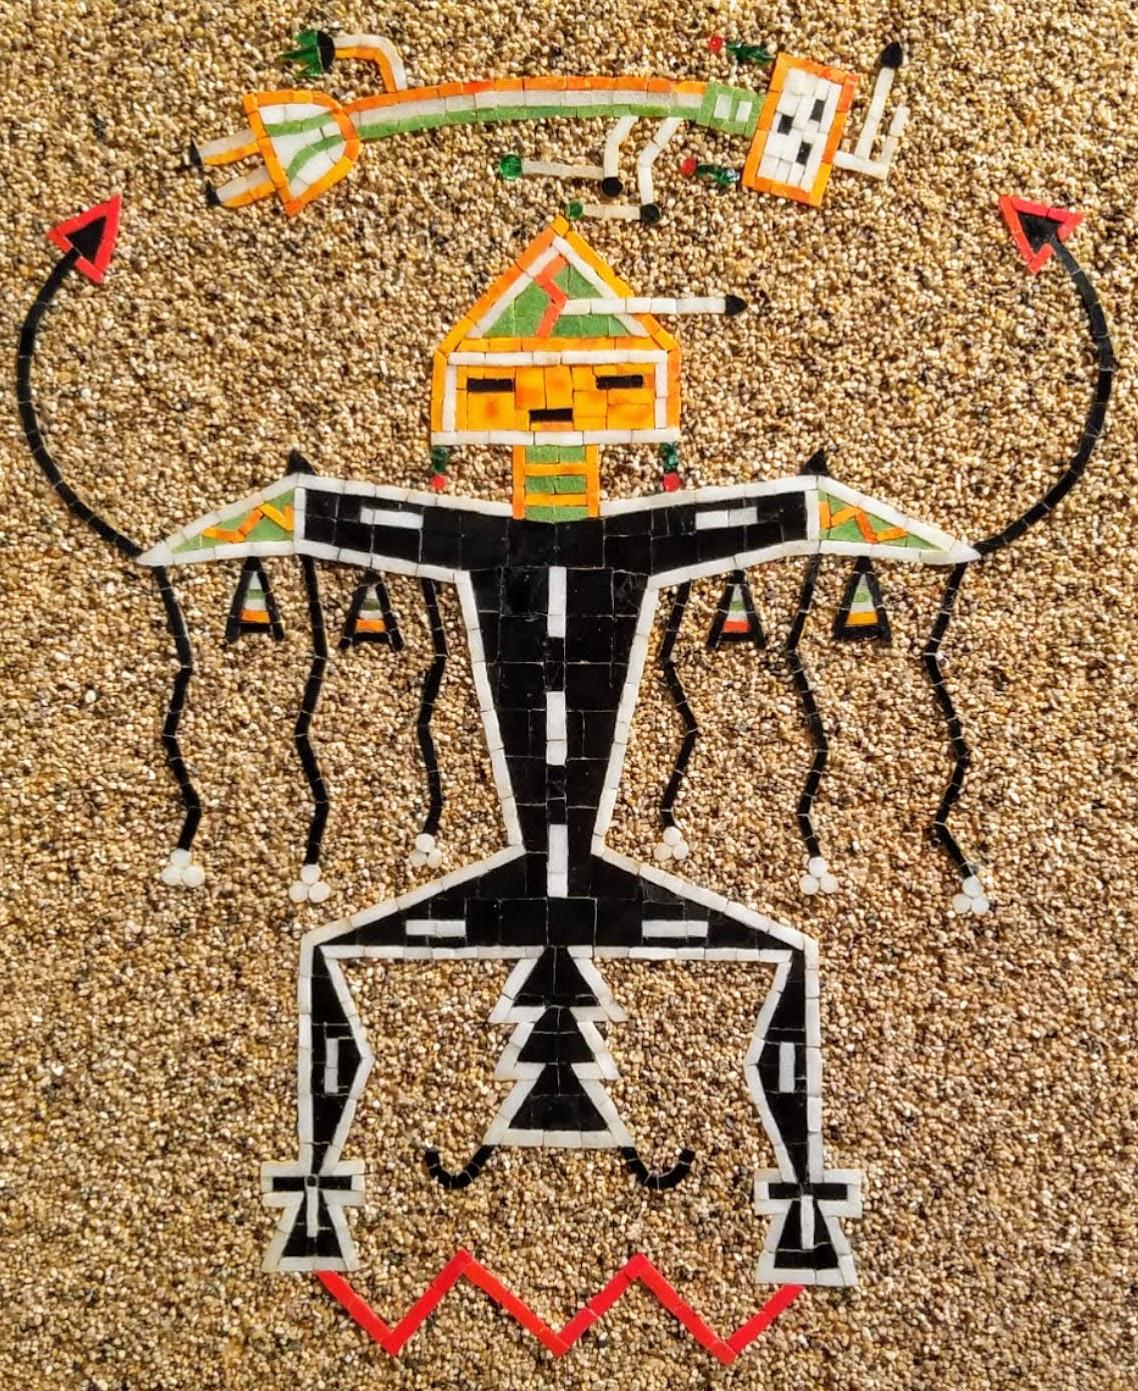 A Navajo sand painting mosaic art wall panel of the Navajo mythological Father Sky or Thunderbird created in the 1960s in a non traditional format from a studio in Tehachapi. California. 
The artist has created a boldly colored image isolated on a